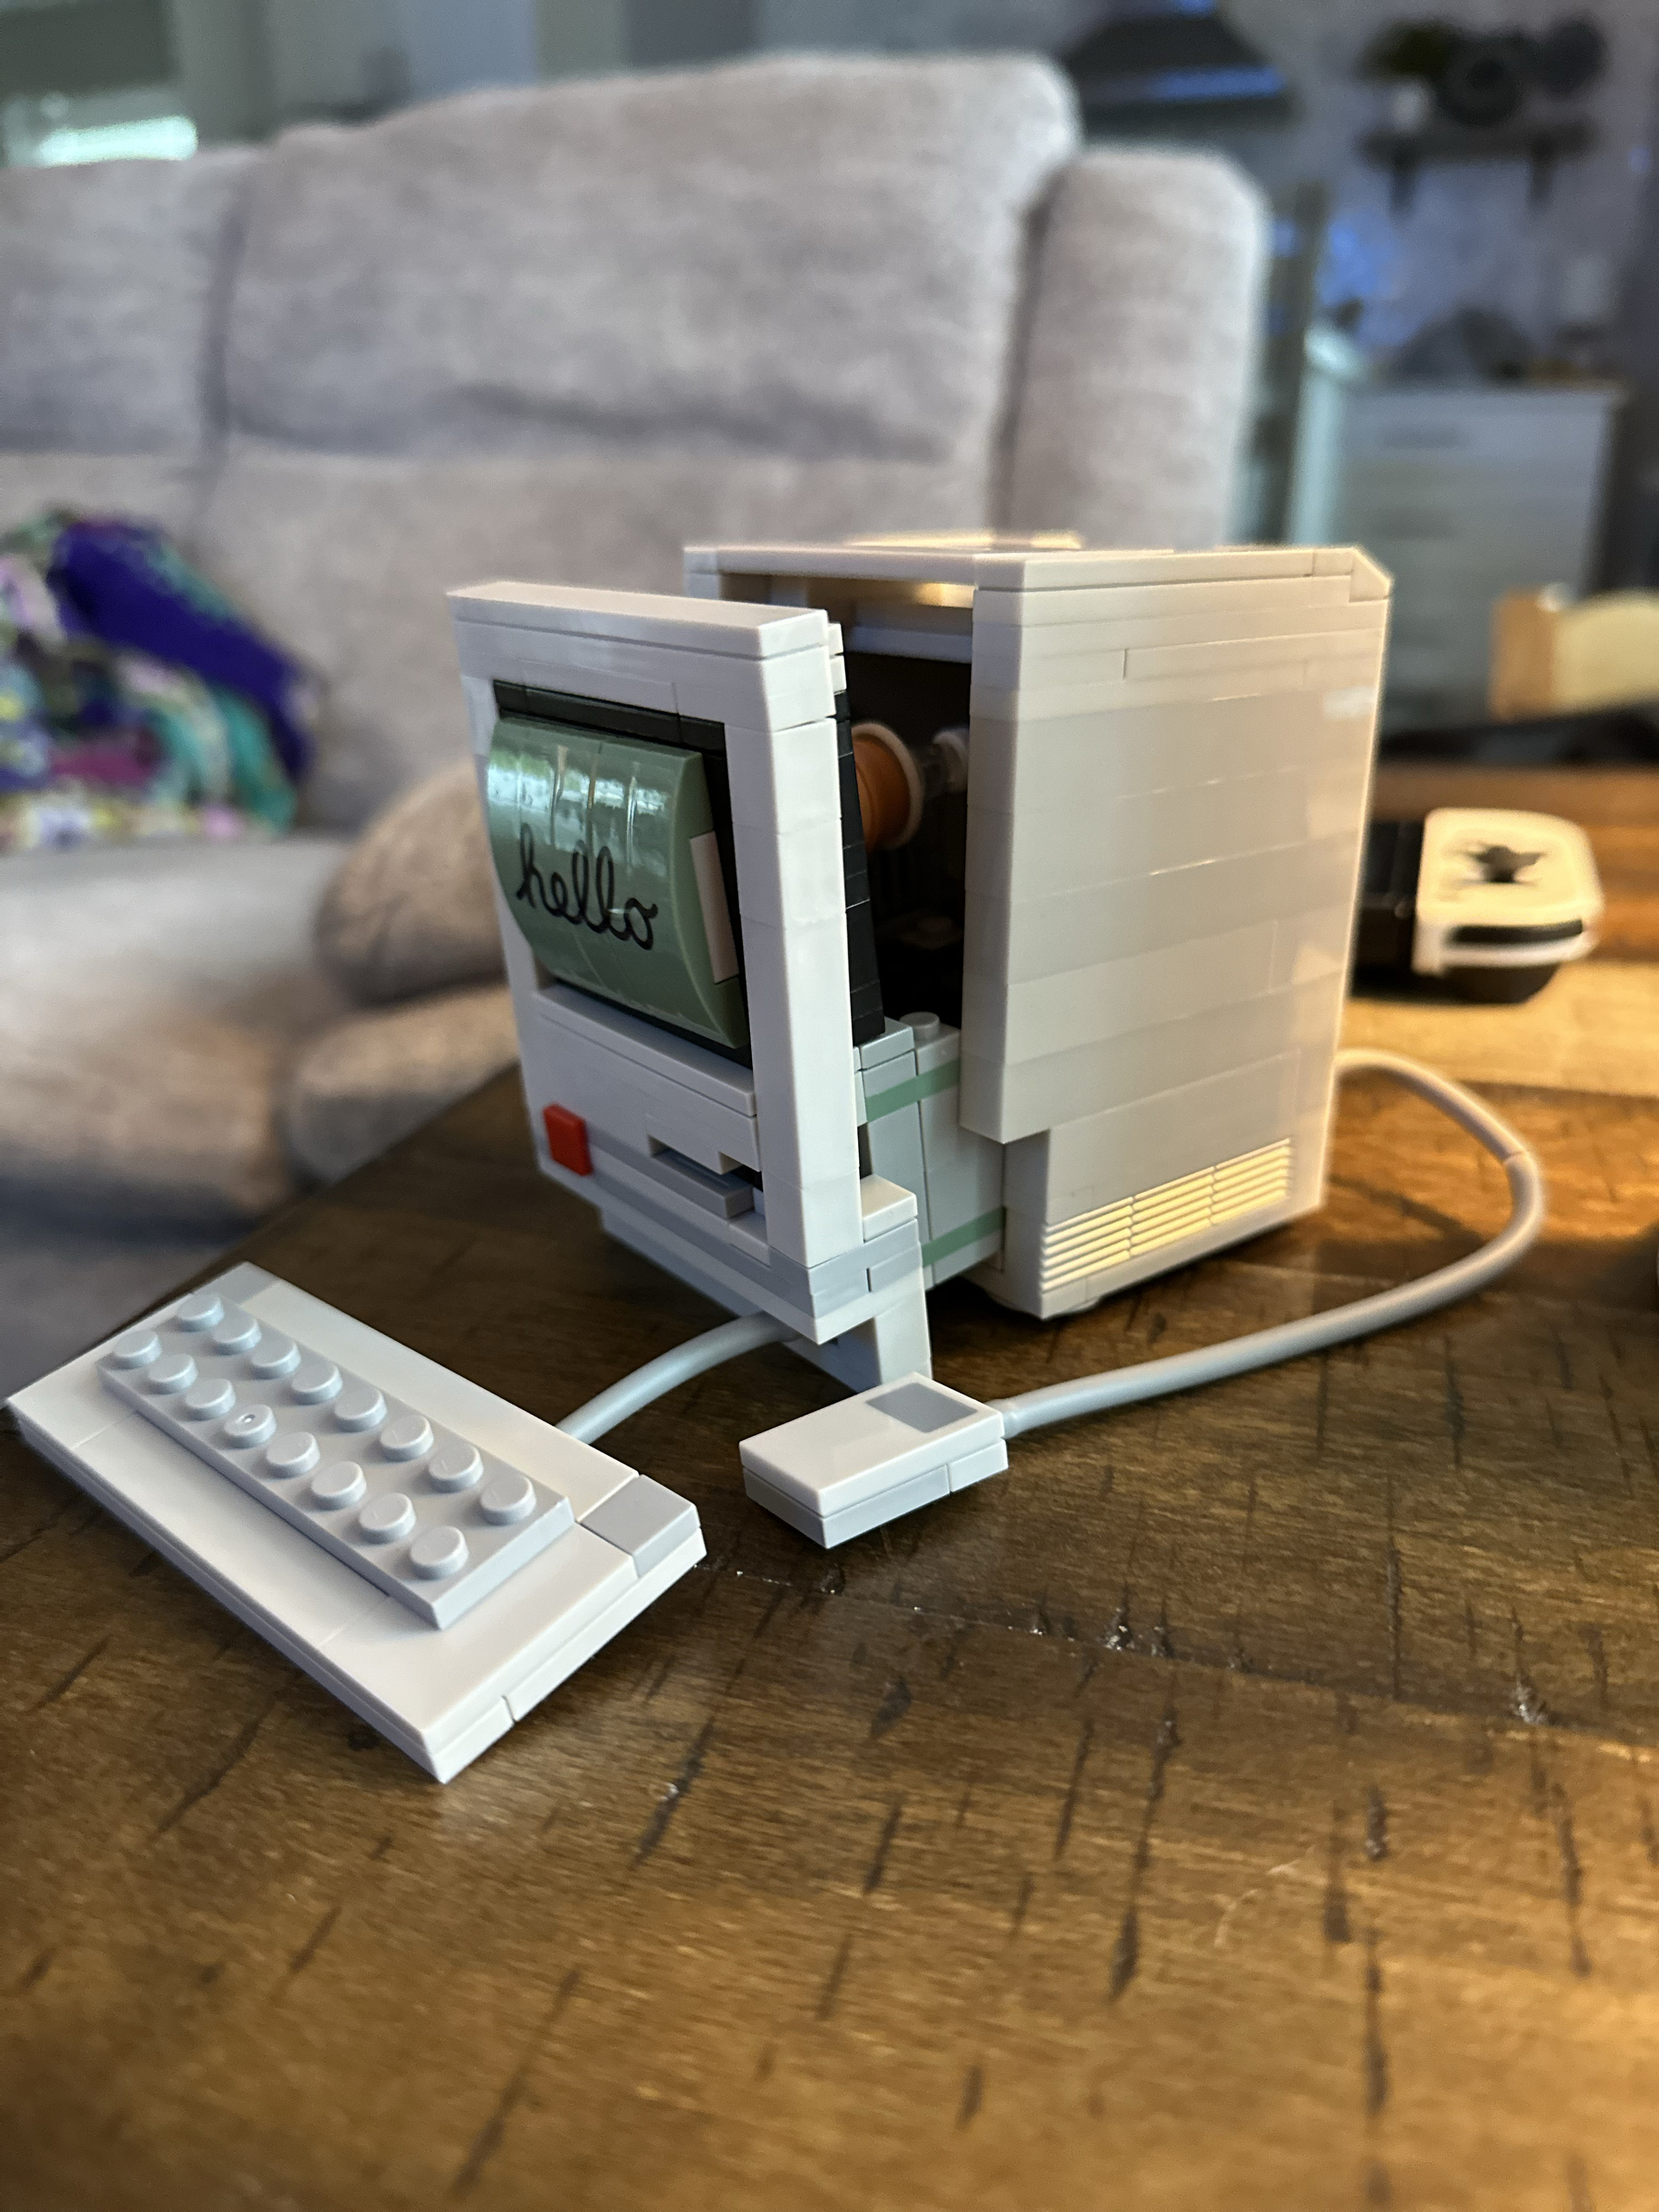 Lego model of early Apple computer.